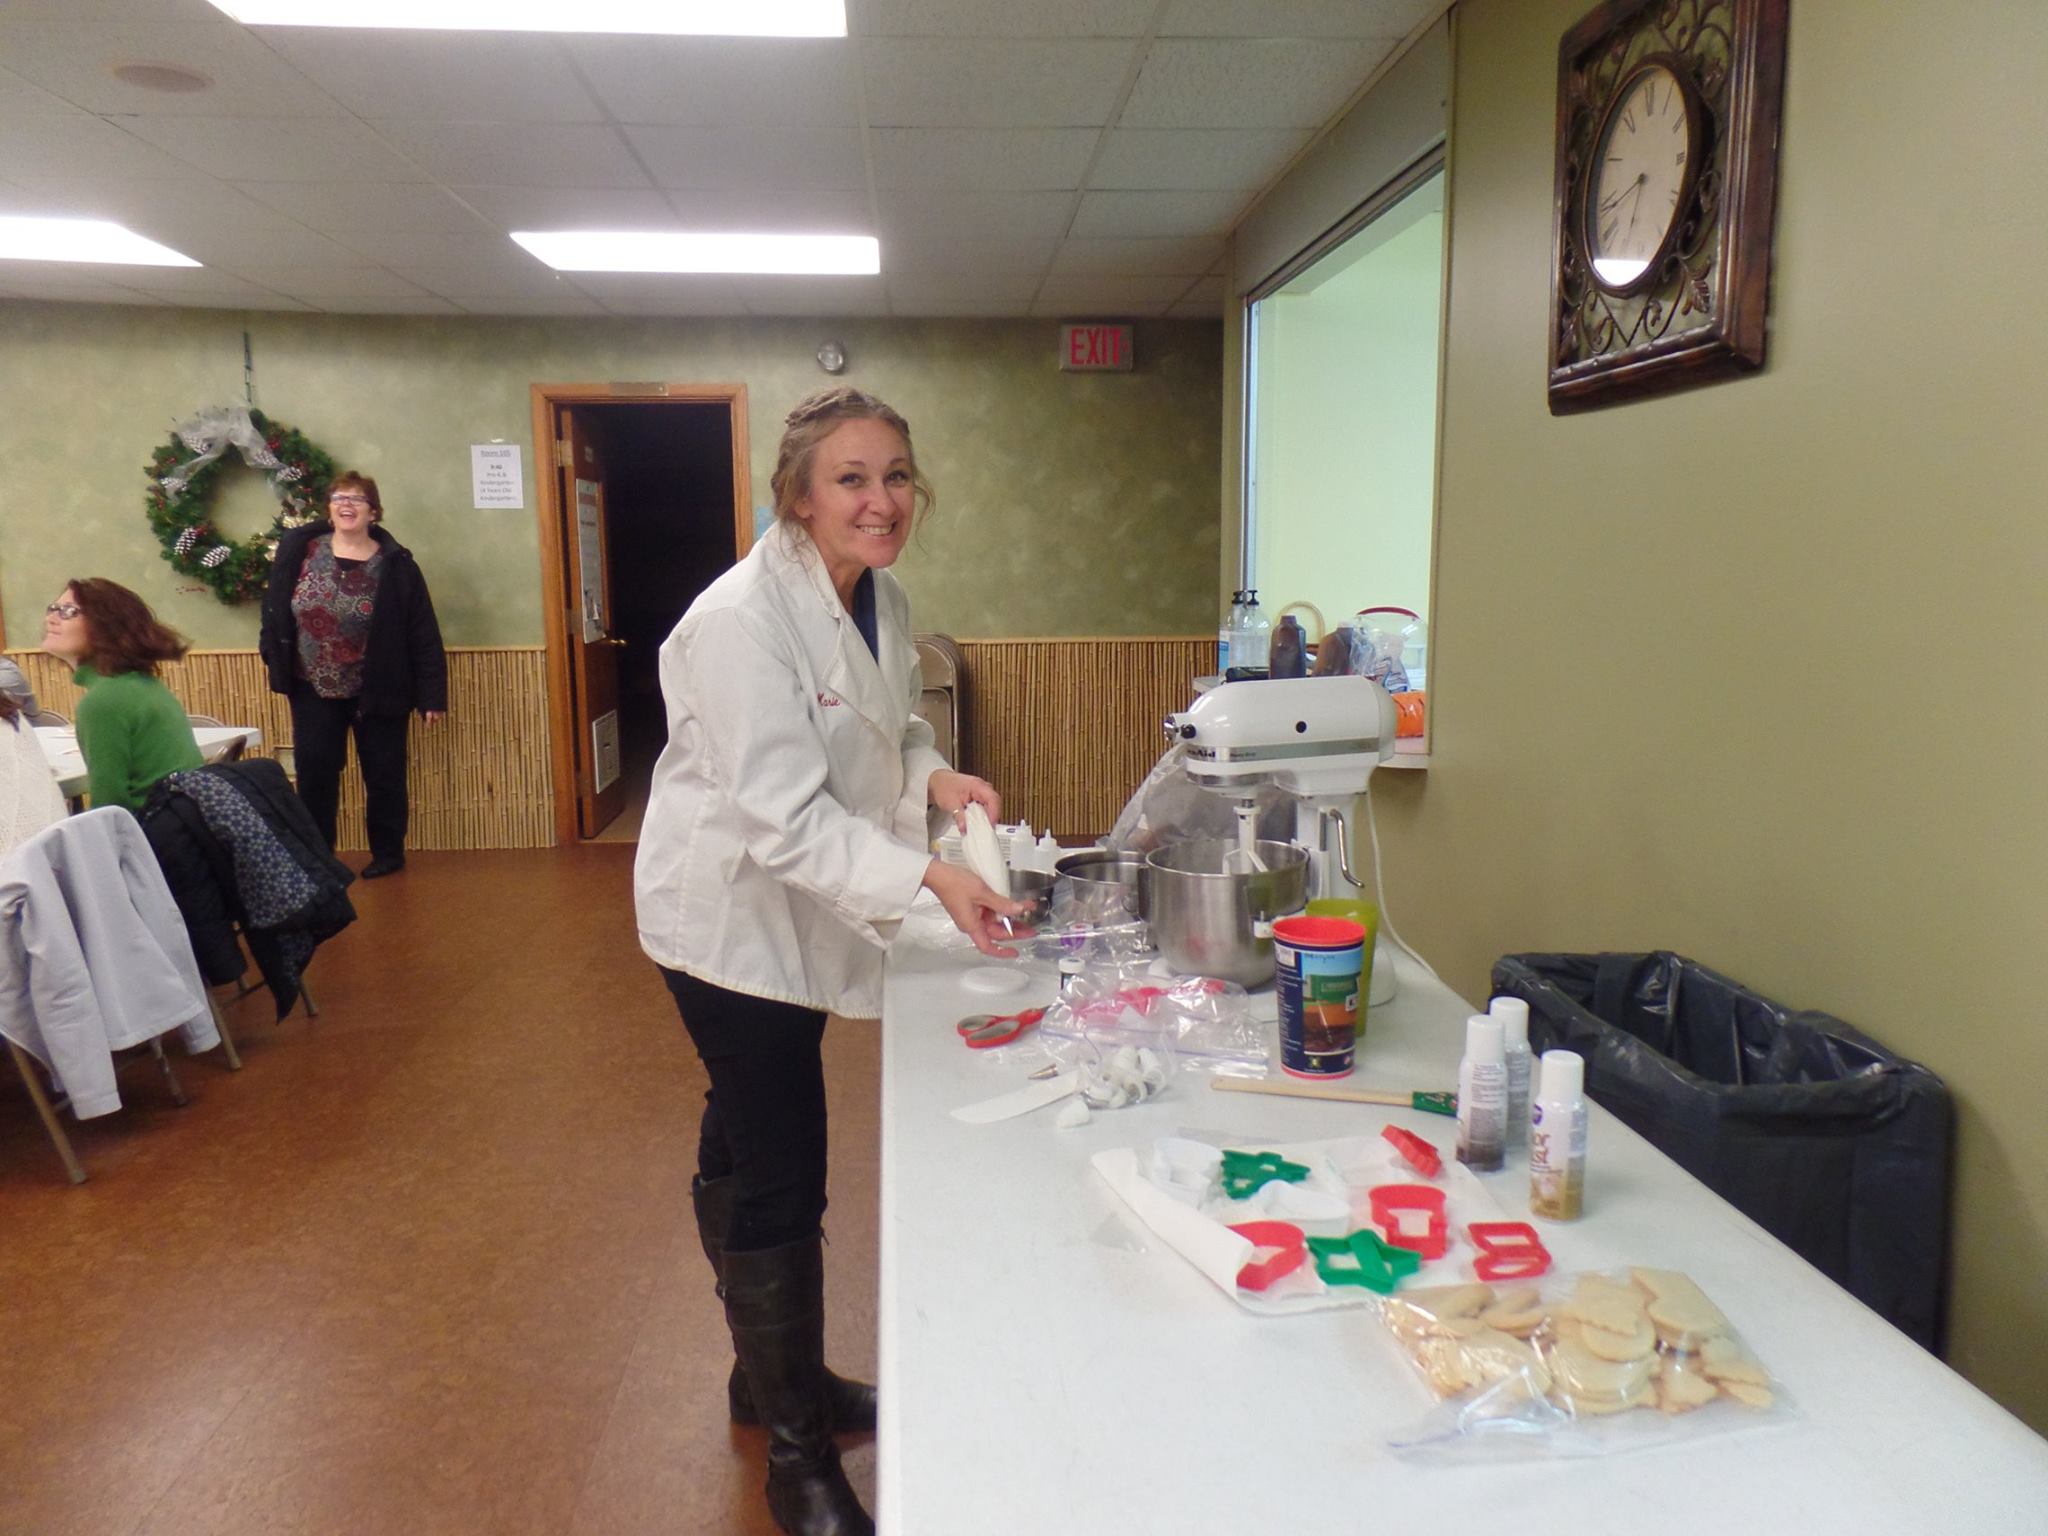 2016-12-16 Inspired Sisters Women's Ministry of Zions Church - Be Social Let's Make Decorated Cookies